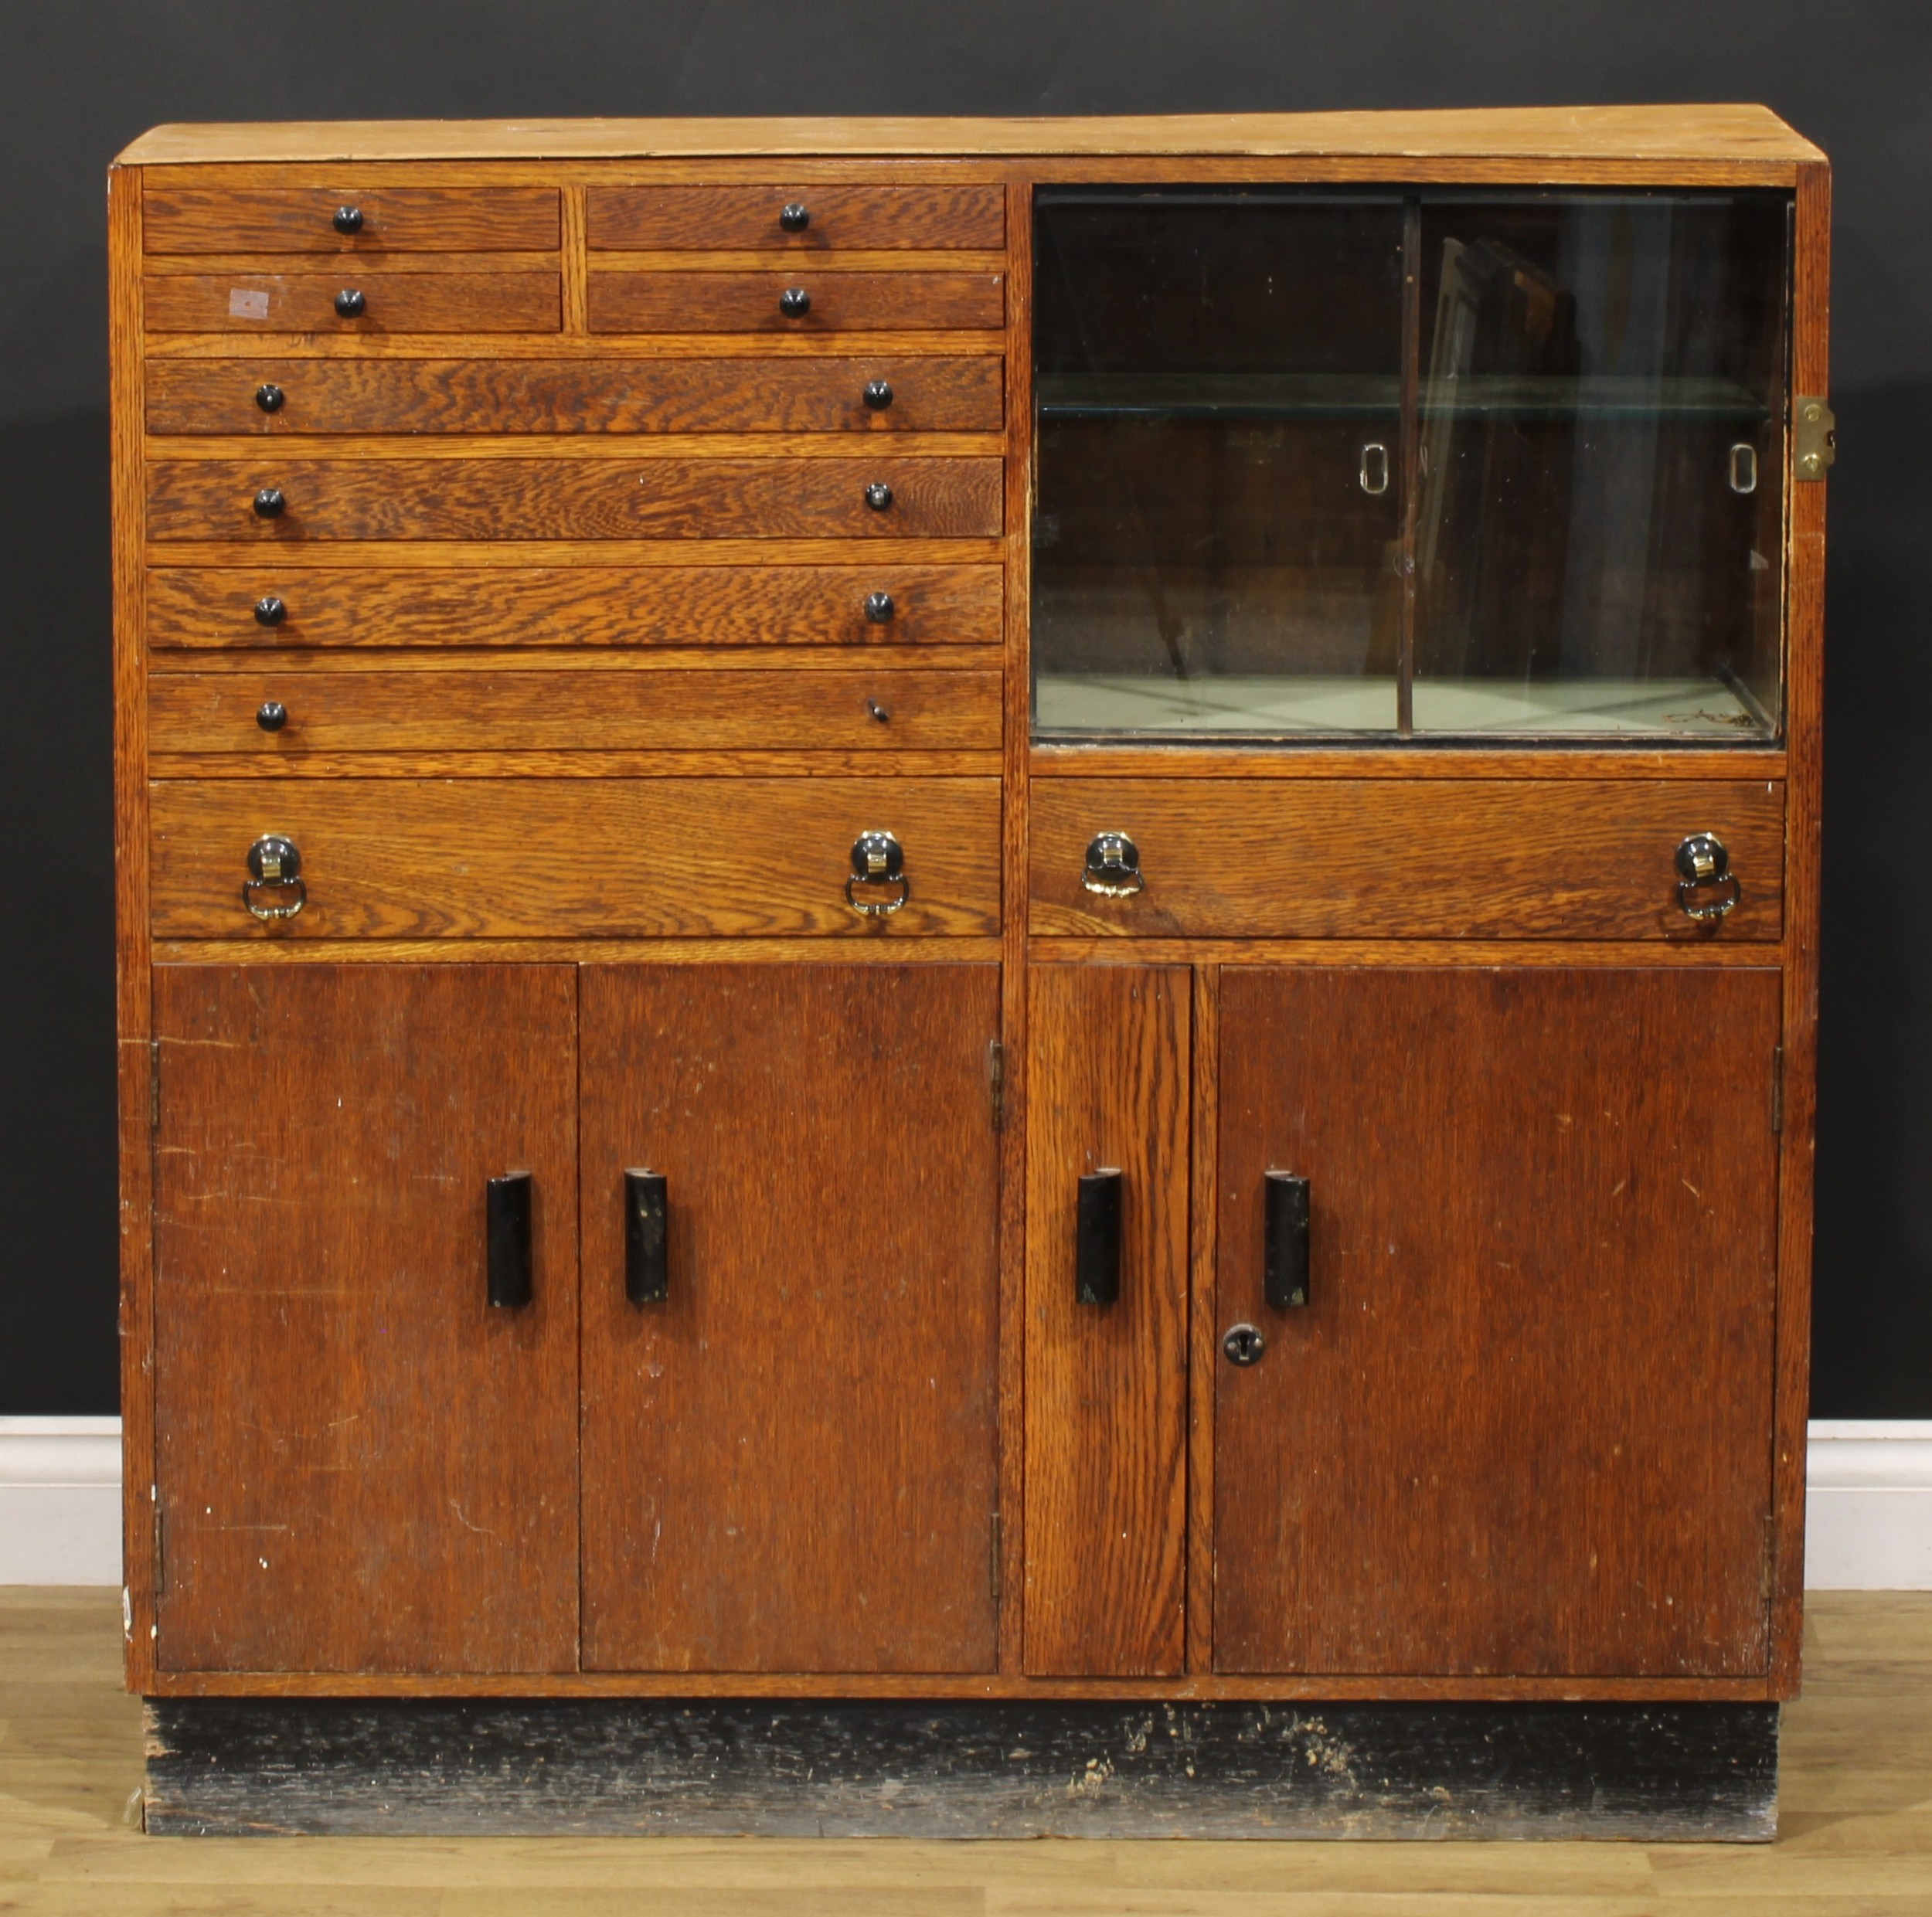 A mid-20th century oak side cabinet, now fitted for the horologist, containing various tools and